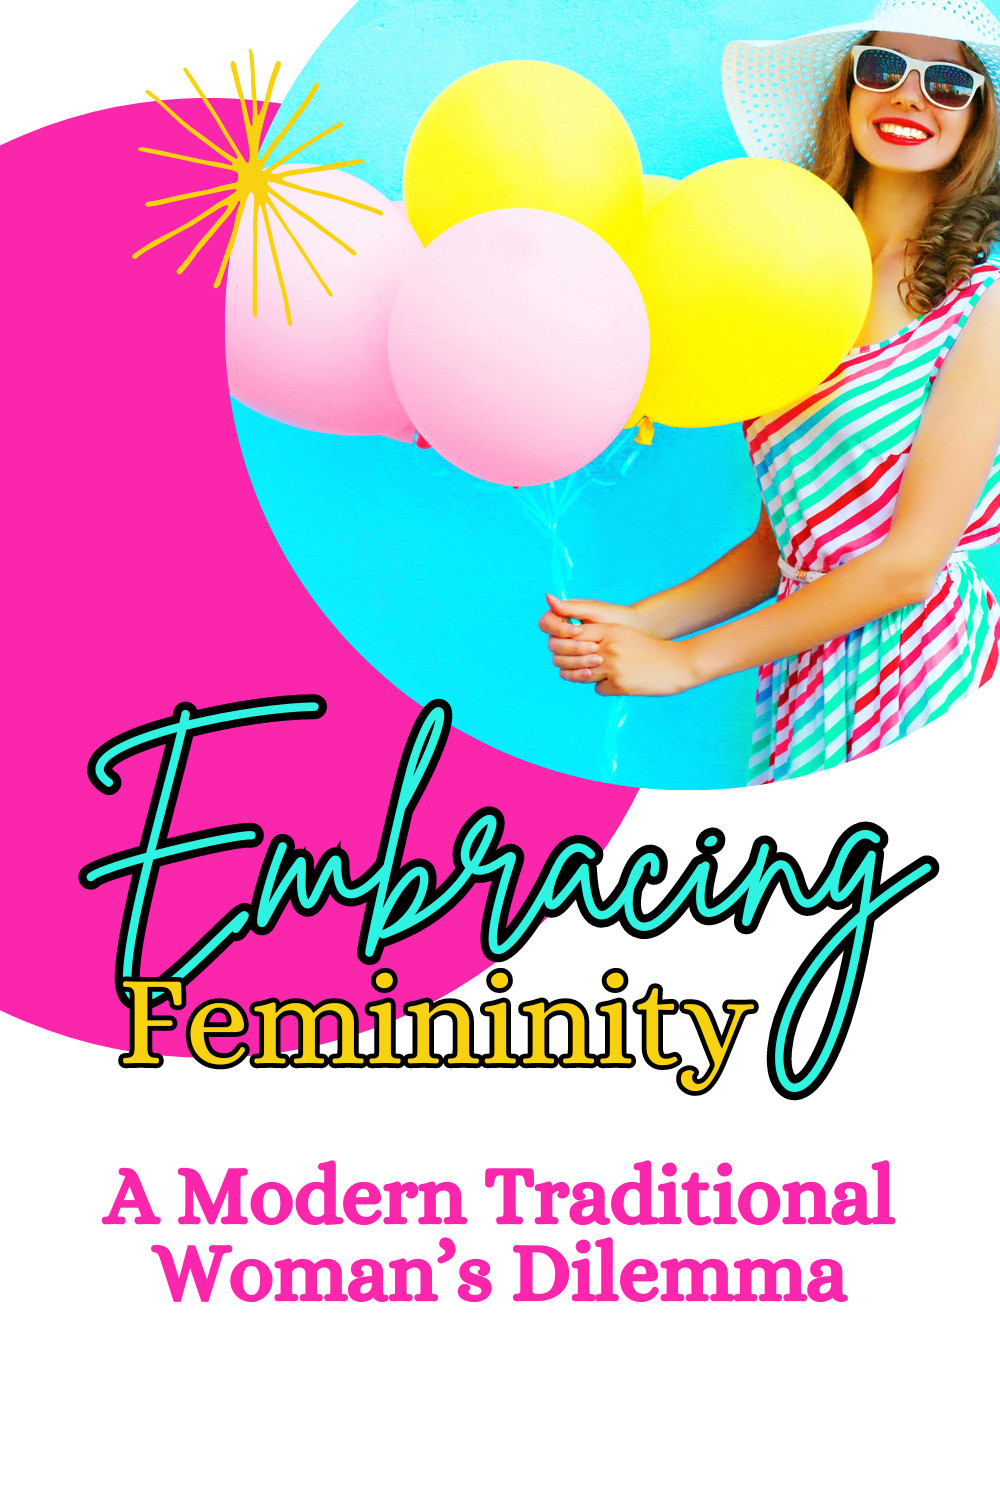 Home is where the heart is: Embracing my femininity